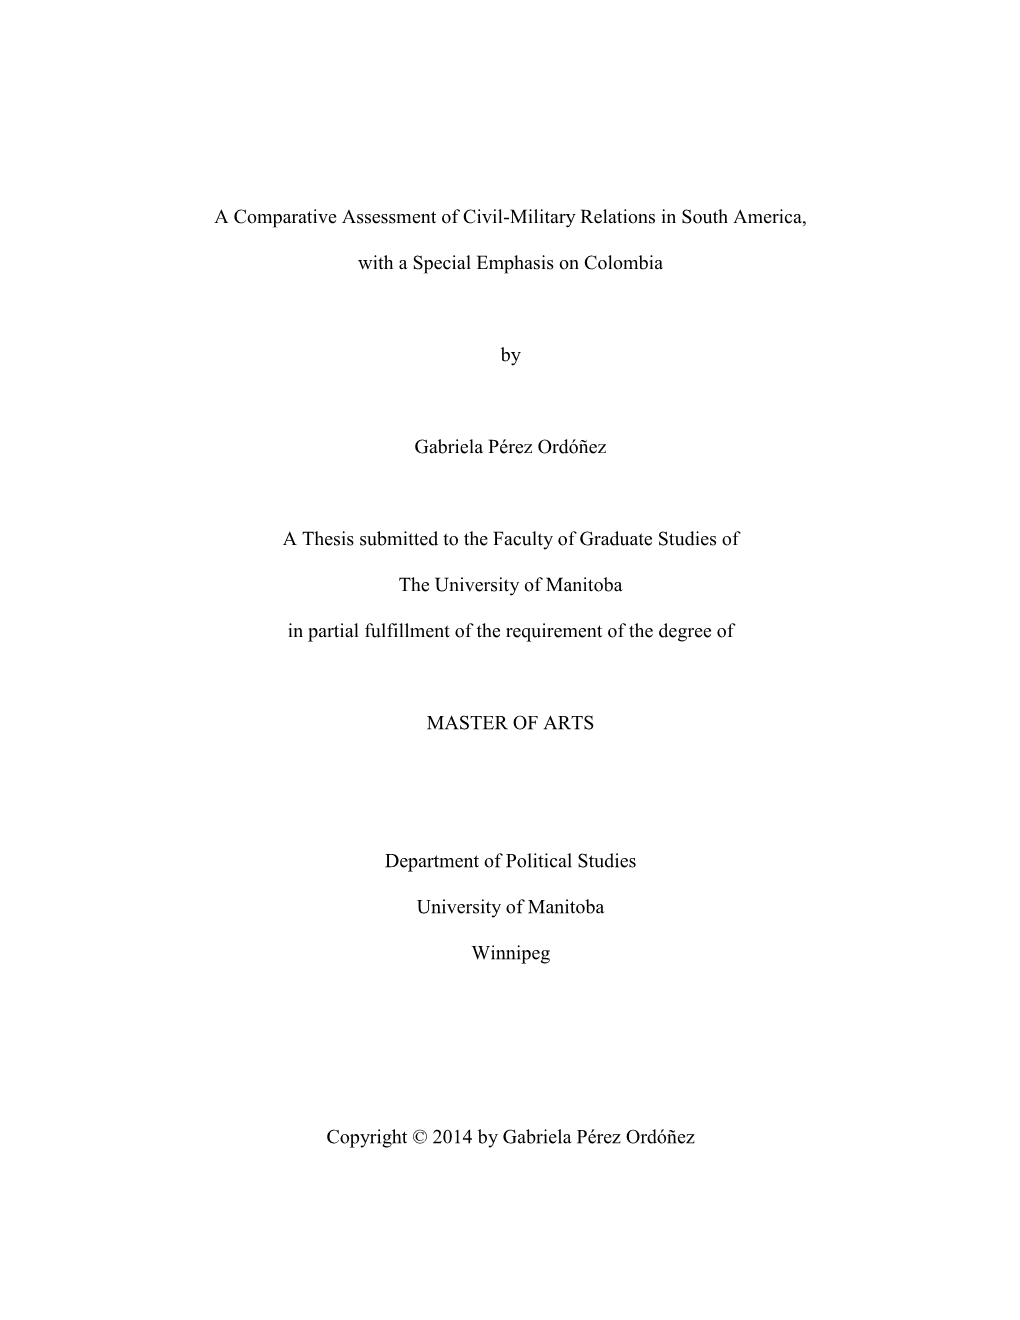 A Comparative Assessment of Civil-Military Relations in South America